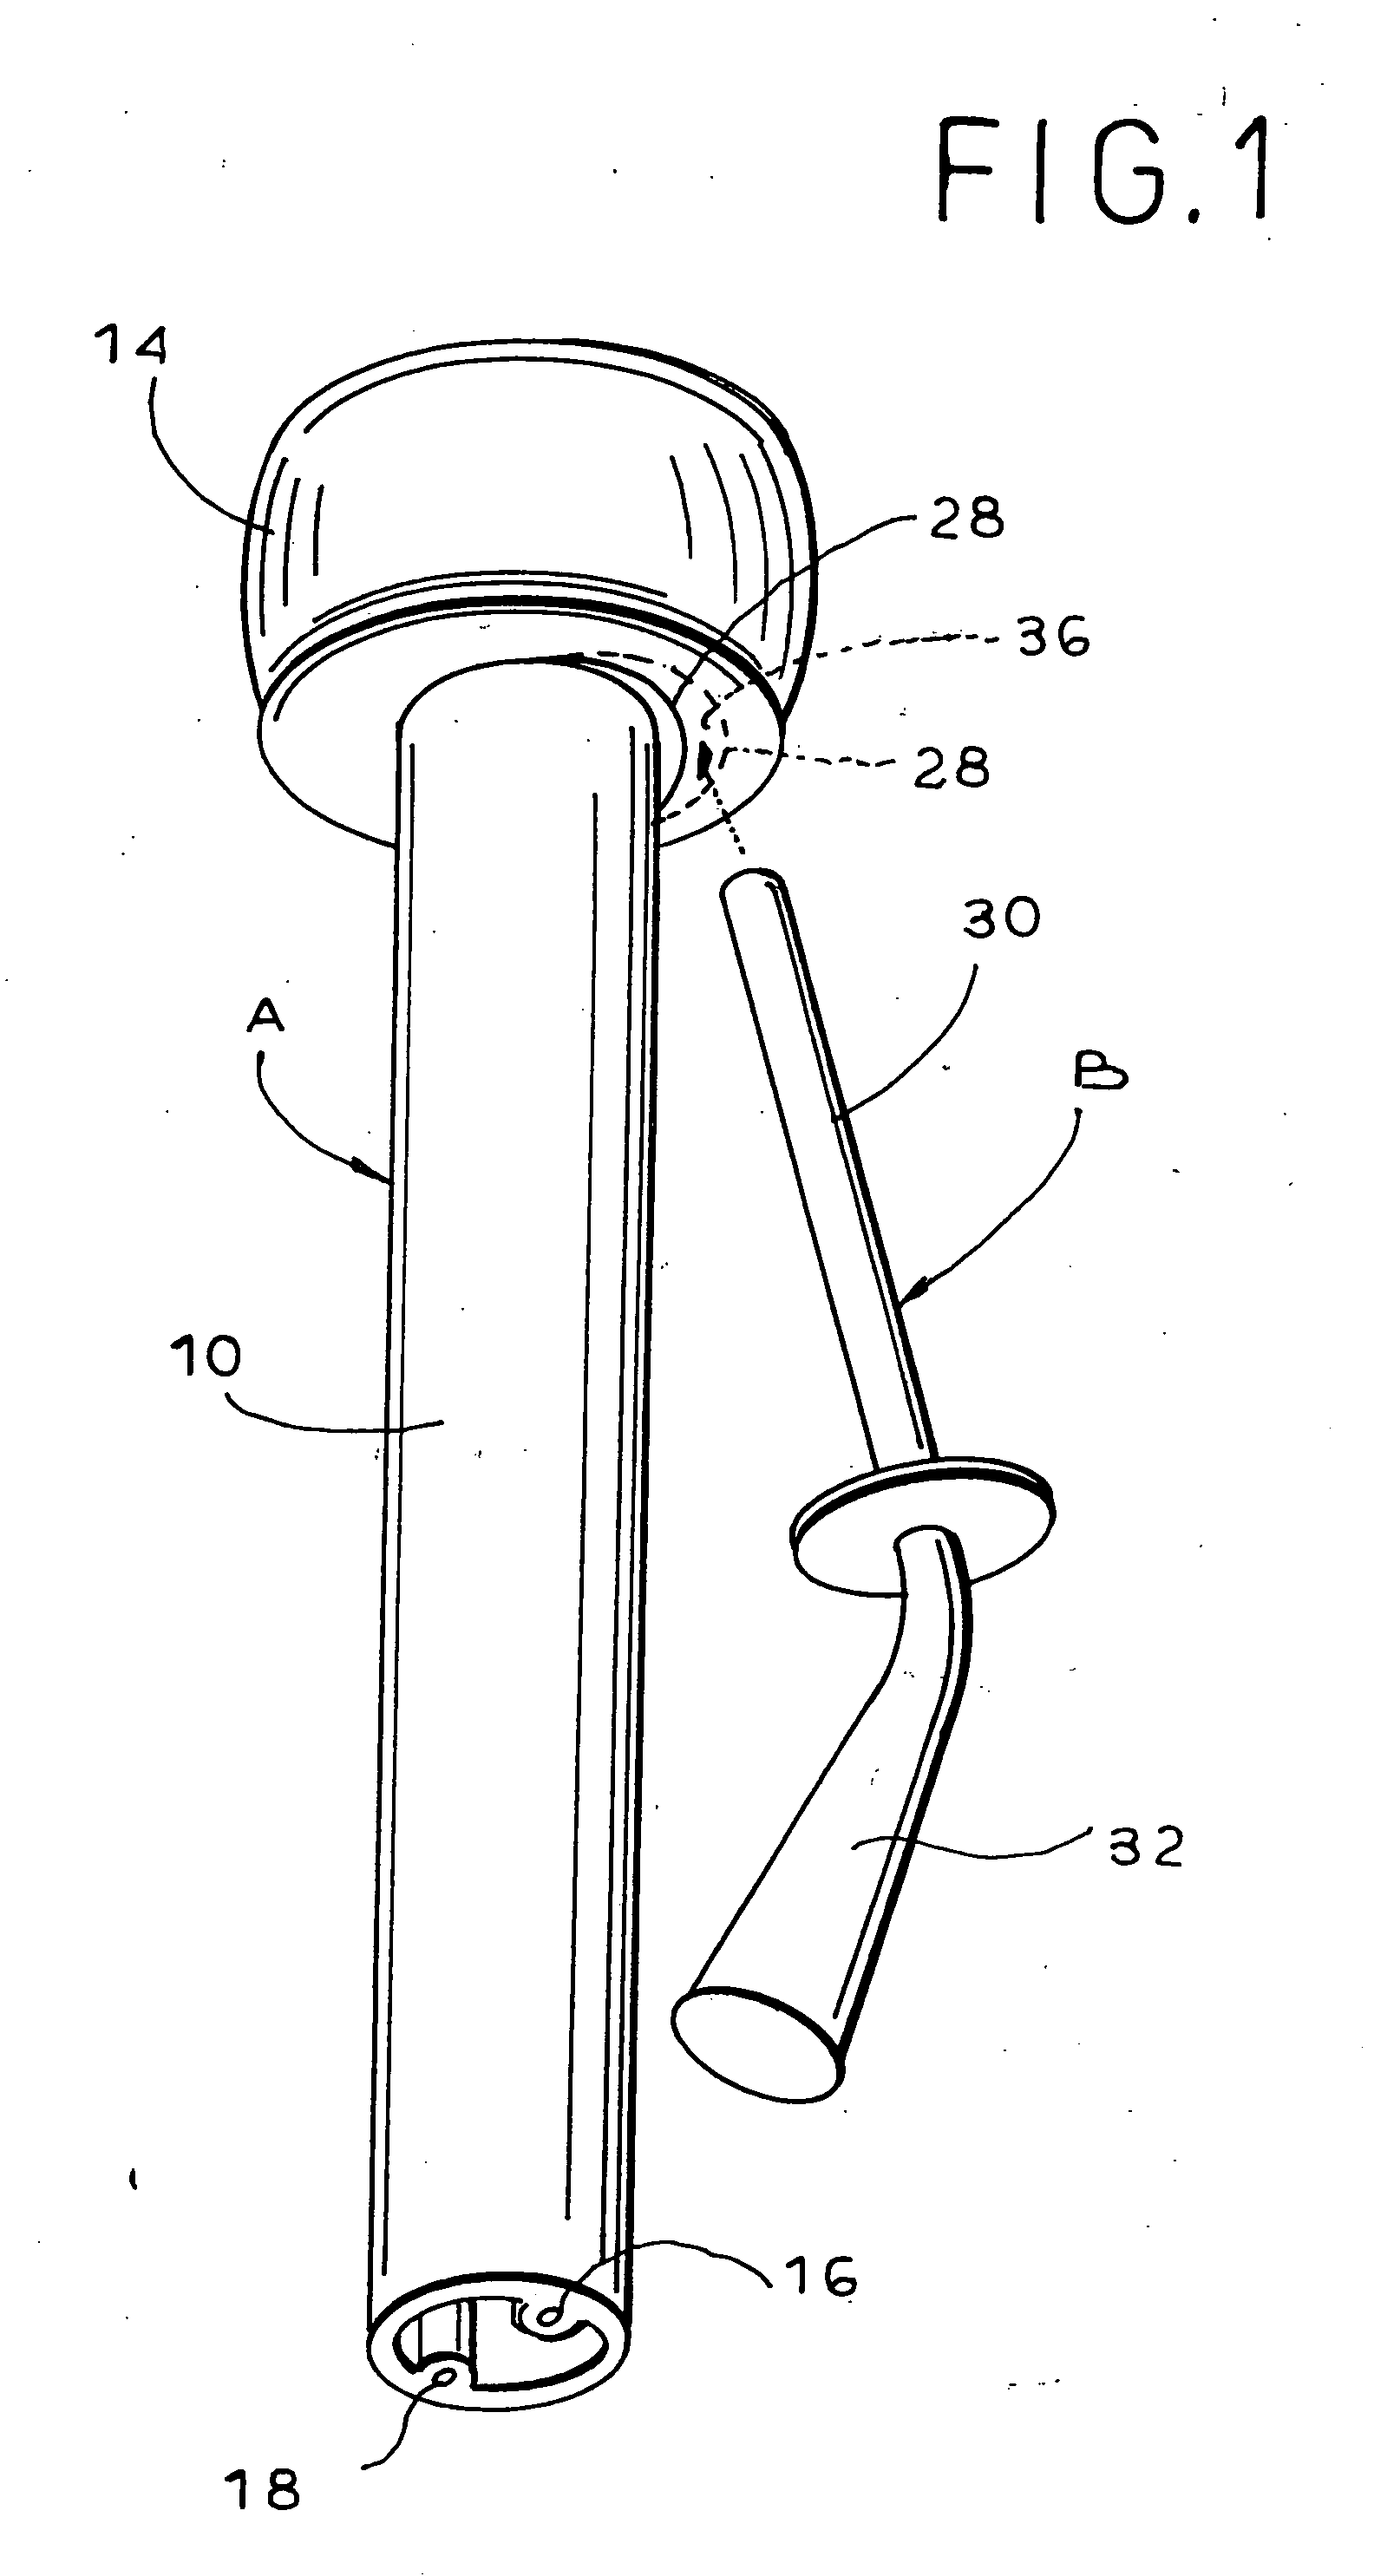 Balloon catheter with positioning pocket